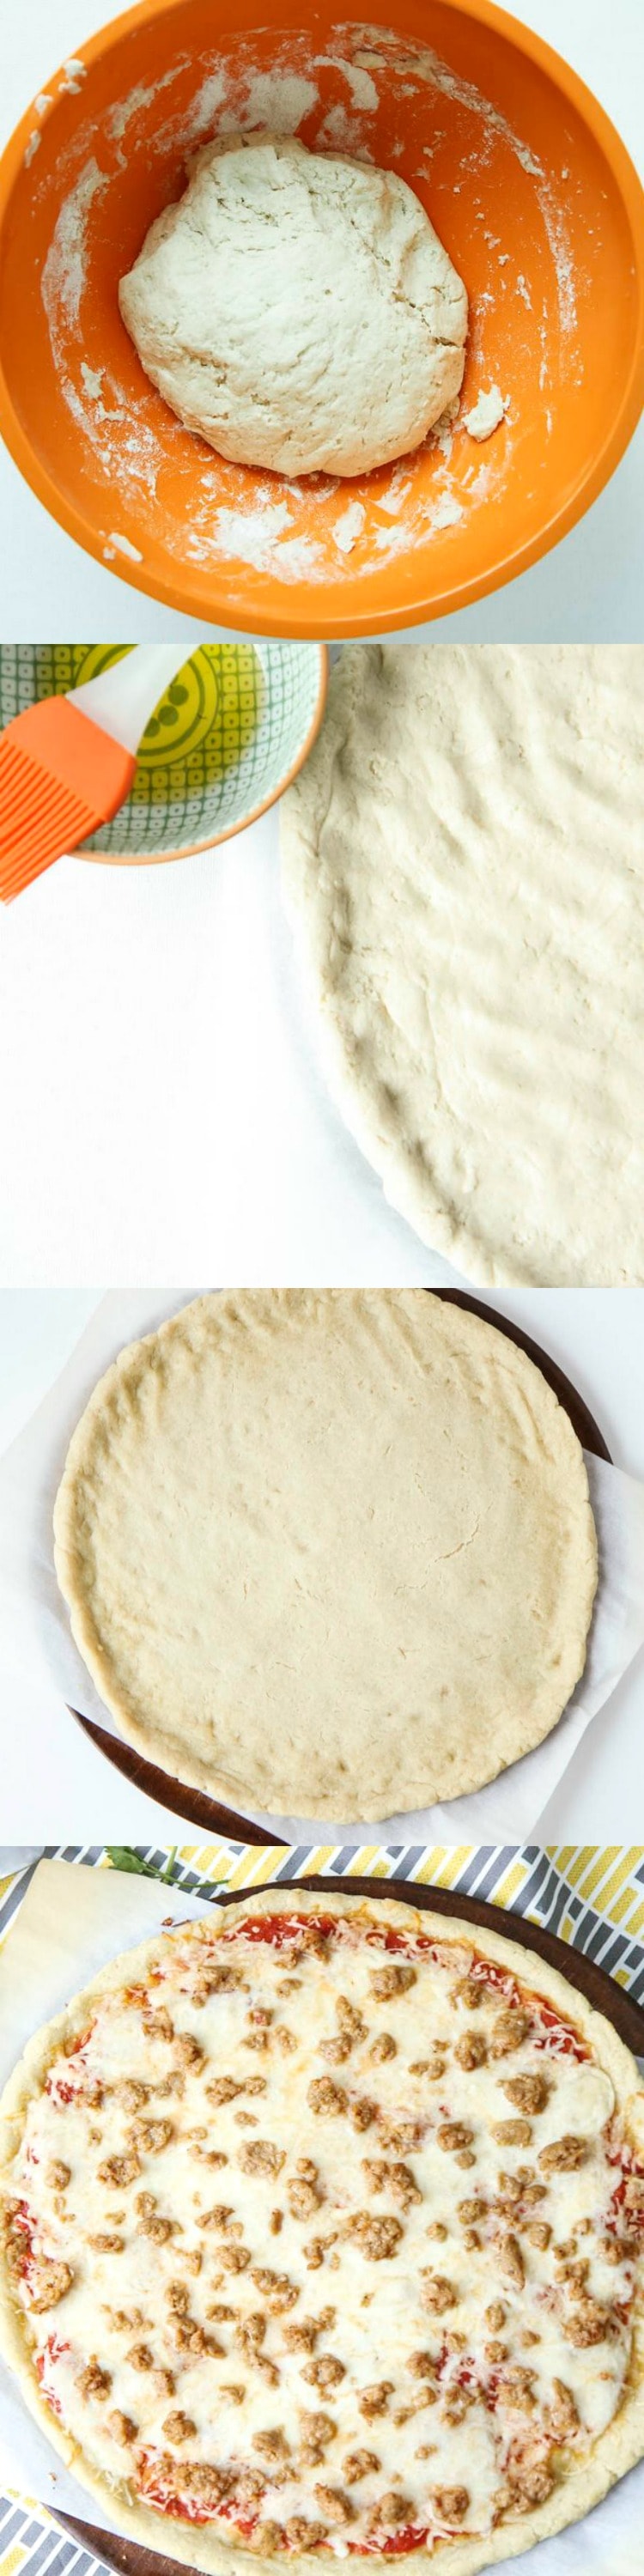 5-ingredient Gluten-Free Pizza Crust from MomAdvice.com